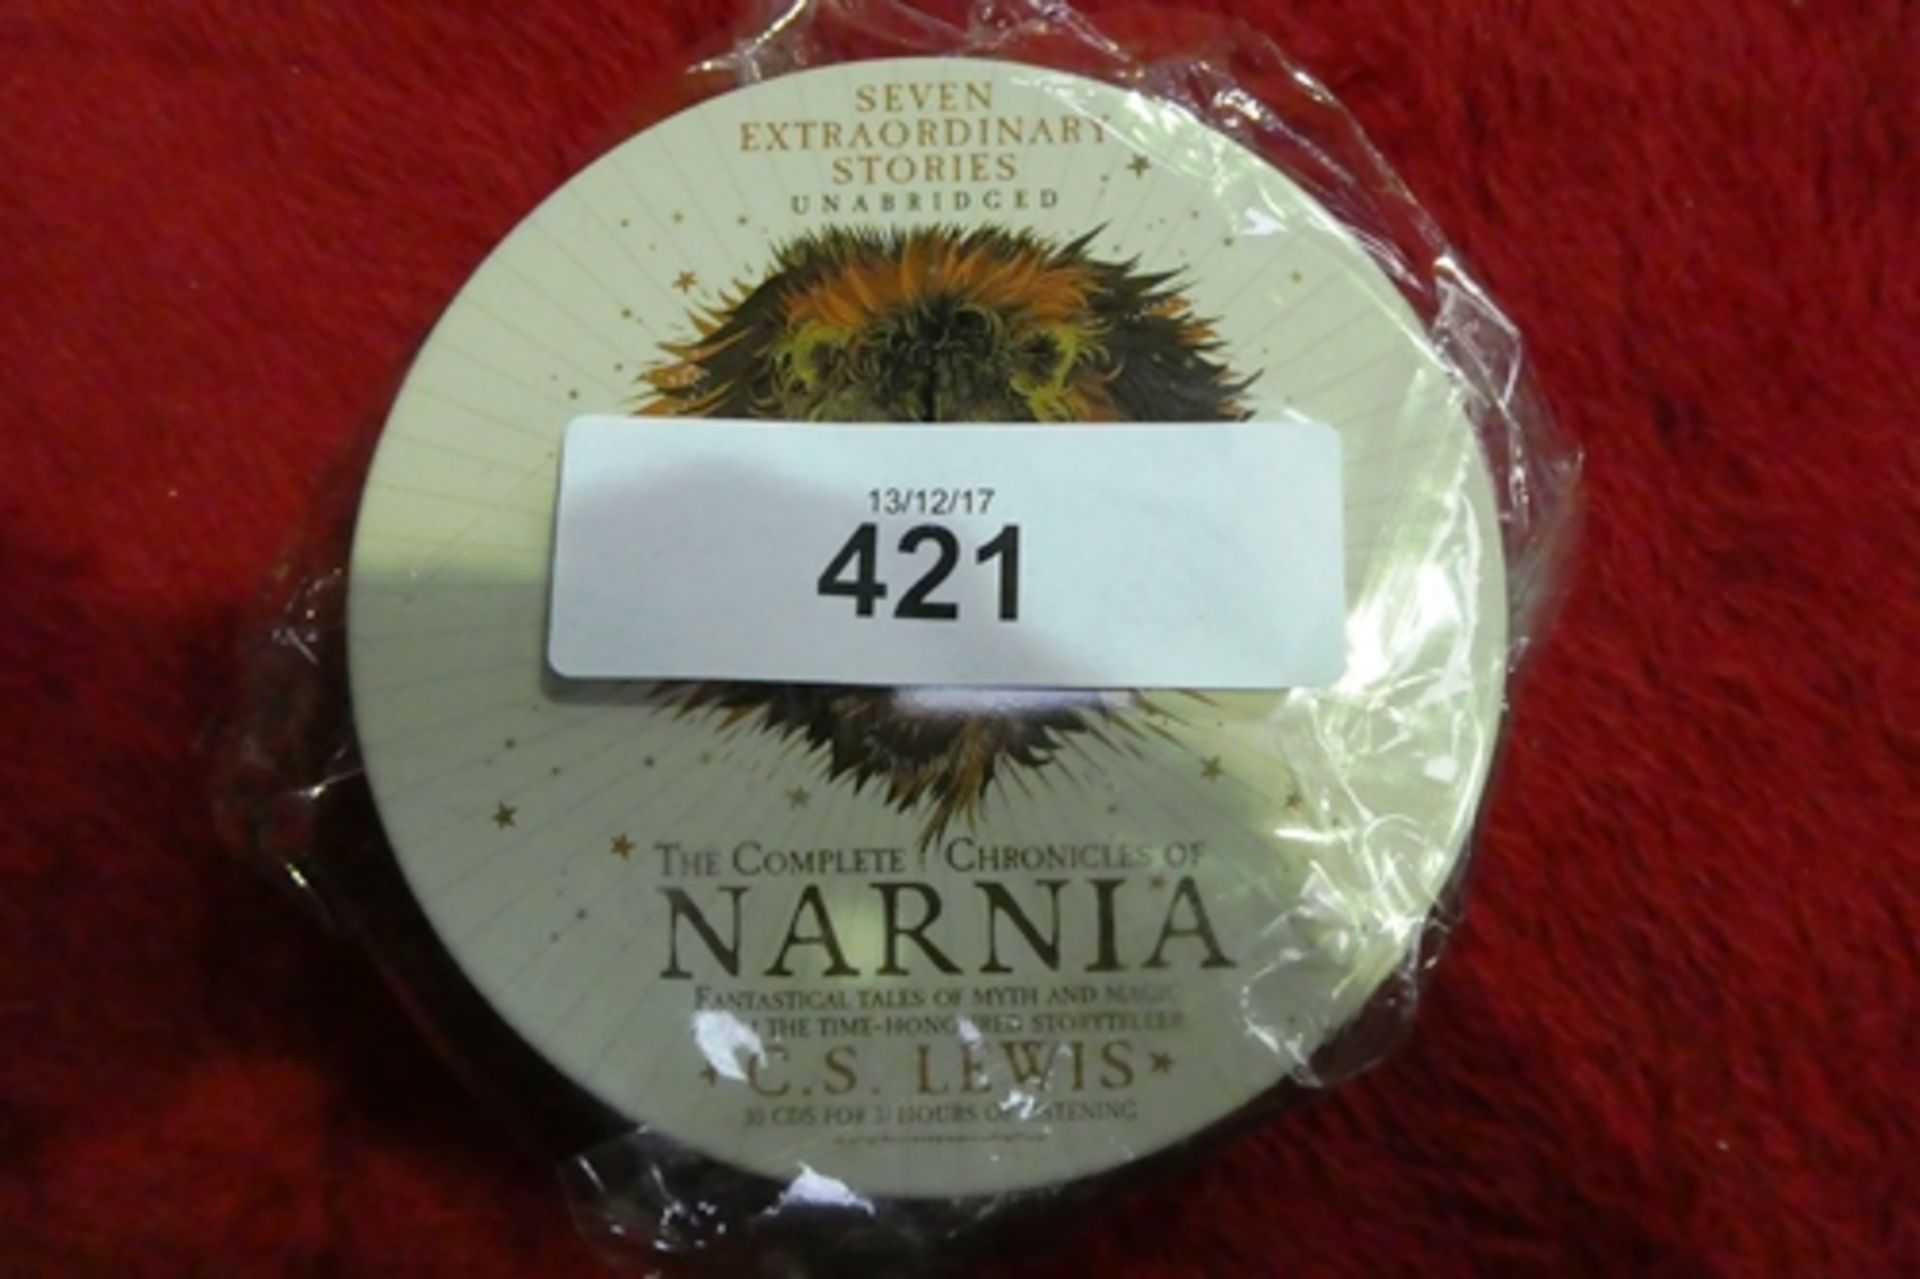 The Complete Chronicals of Narnia 30 CD audio book set, RRP £80.00 - Sealed new (FC5)